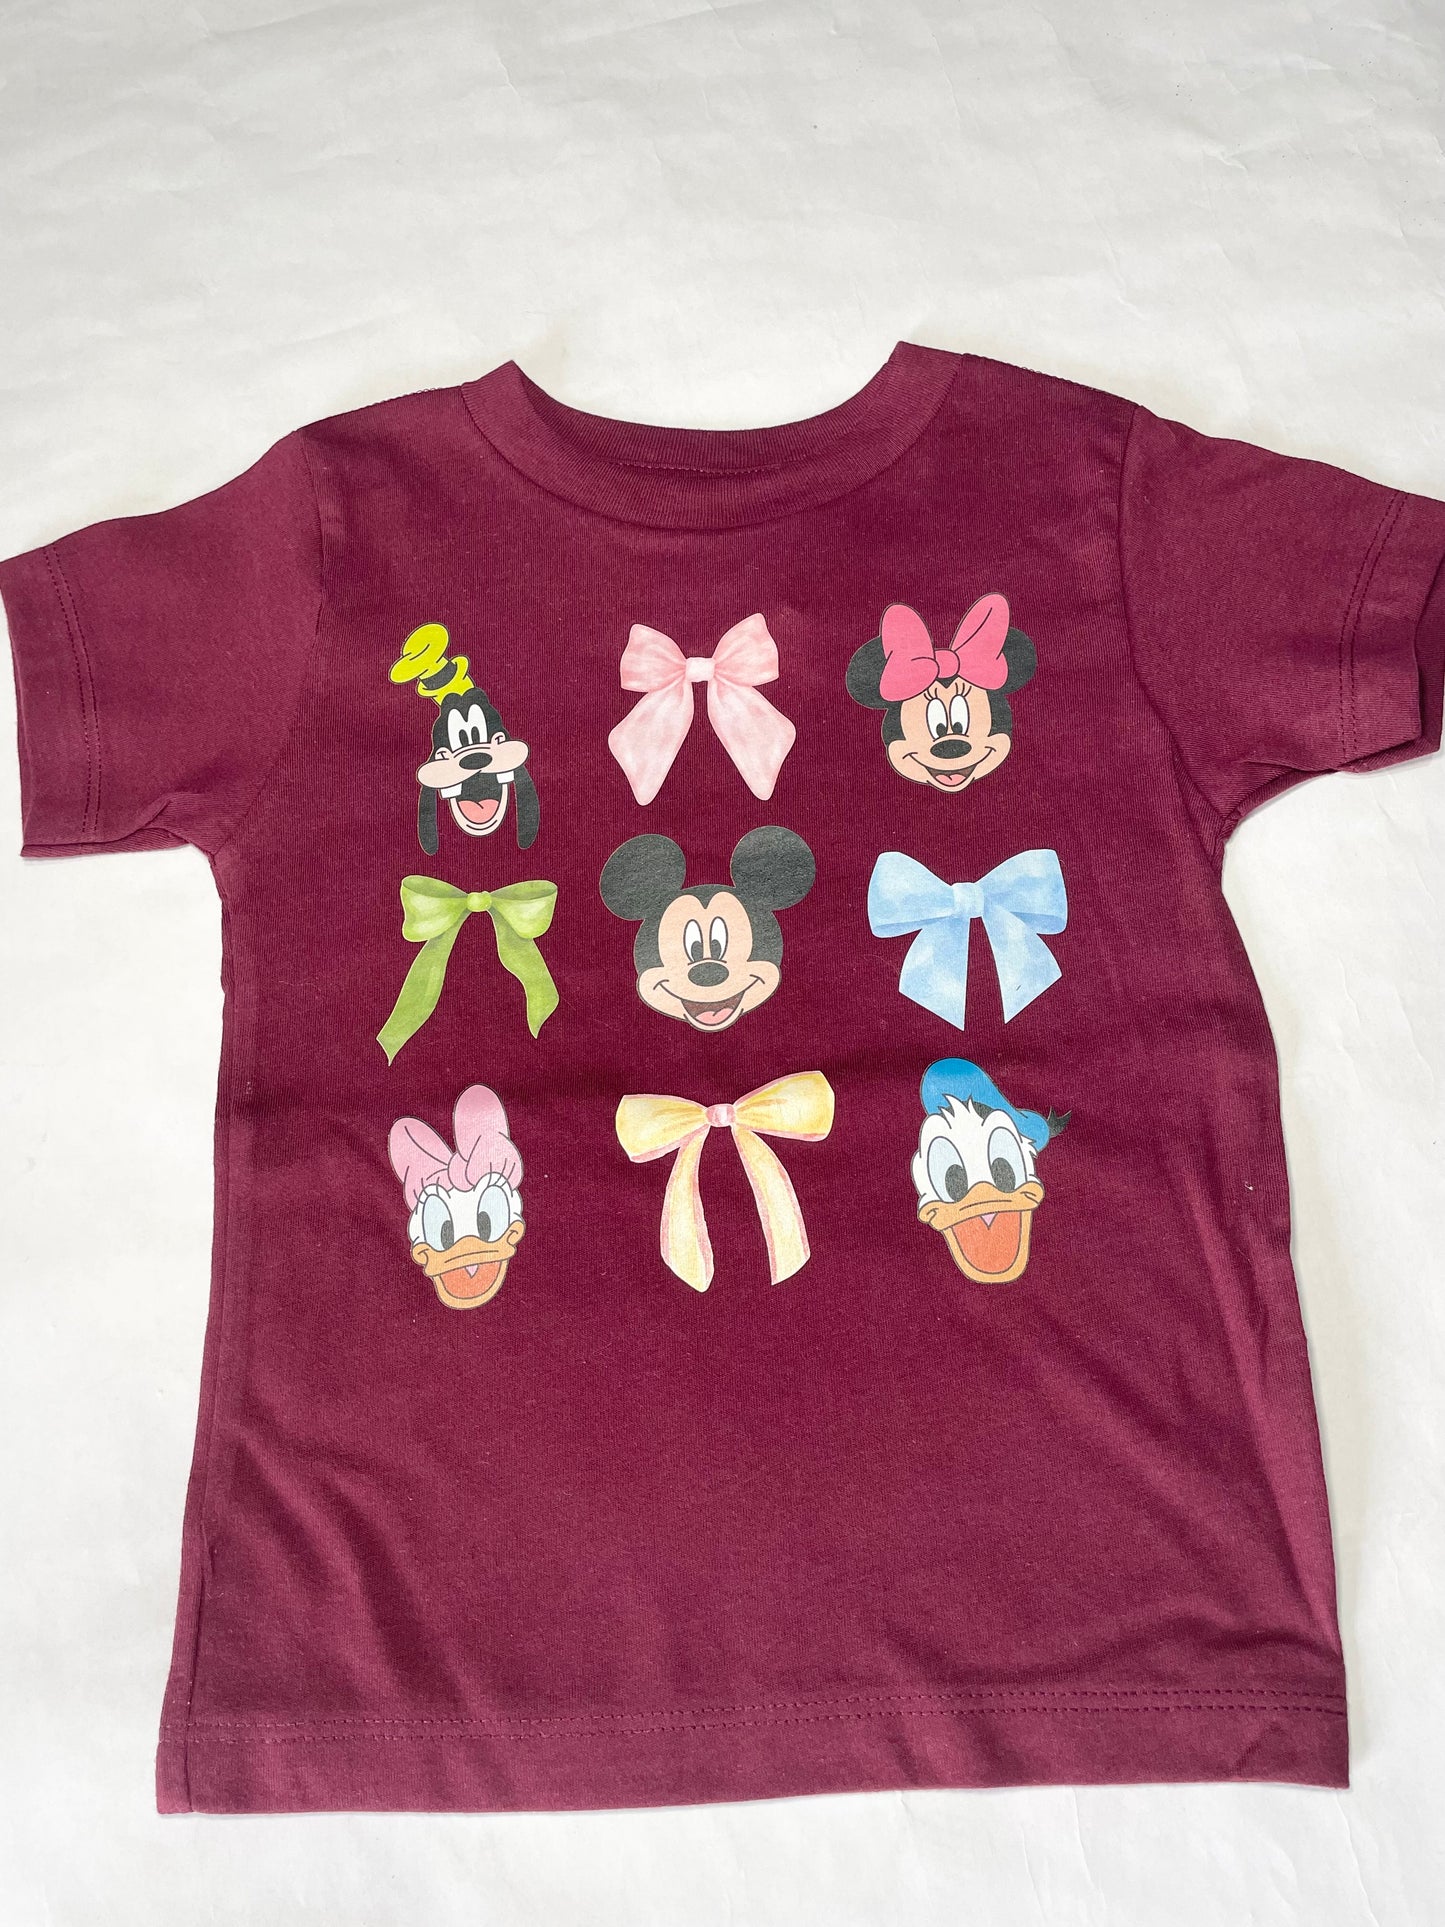 Maroon "mouse crew" t-shirt